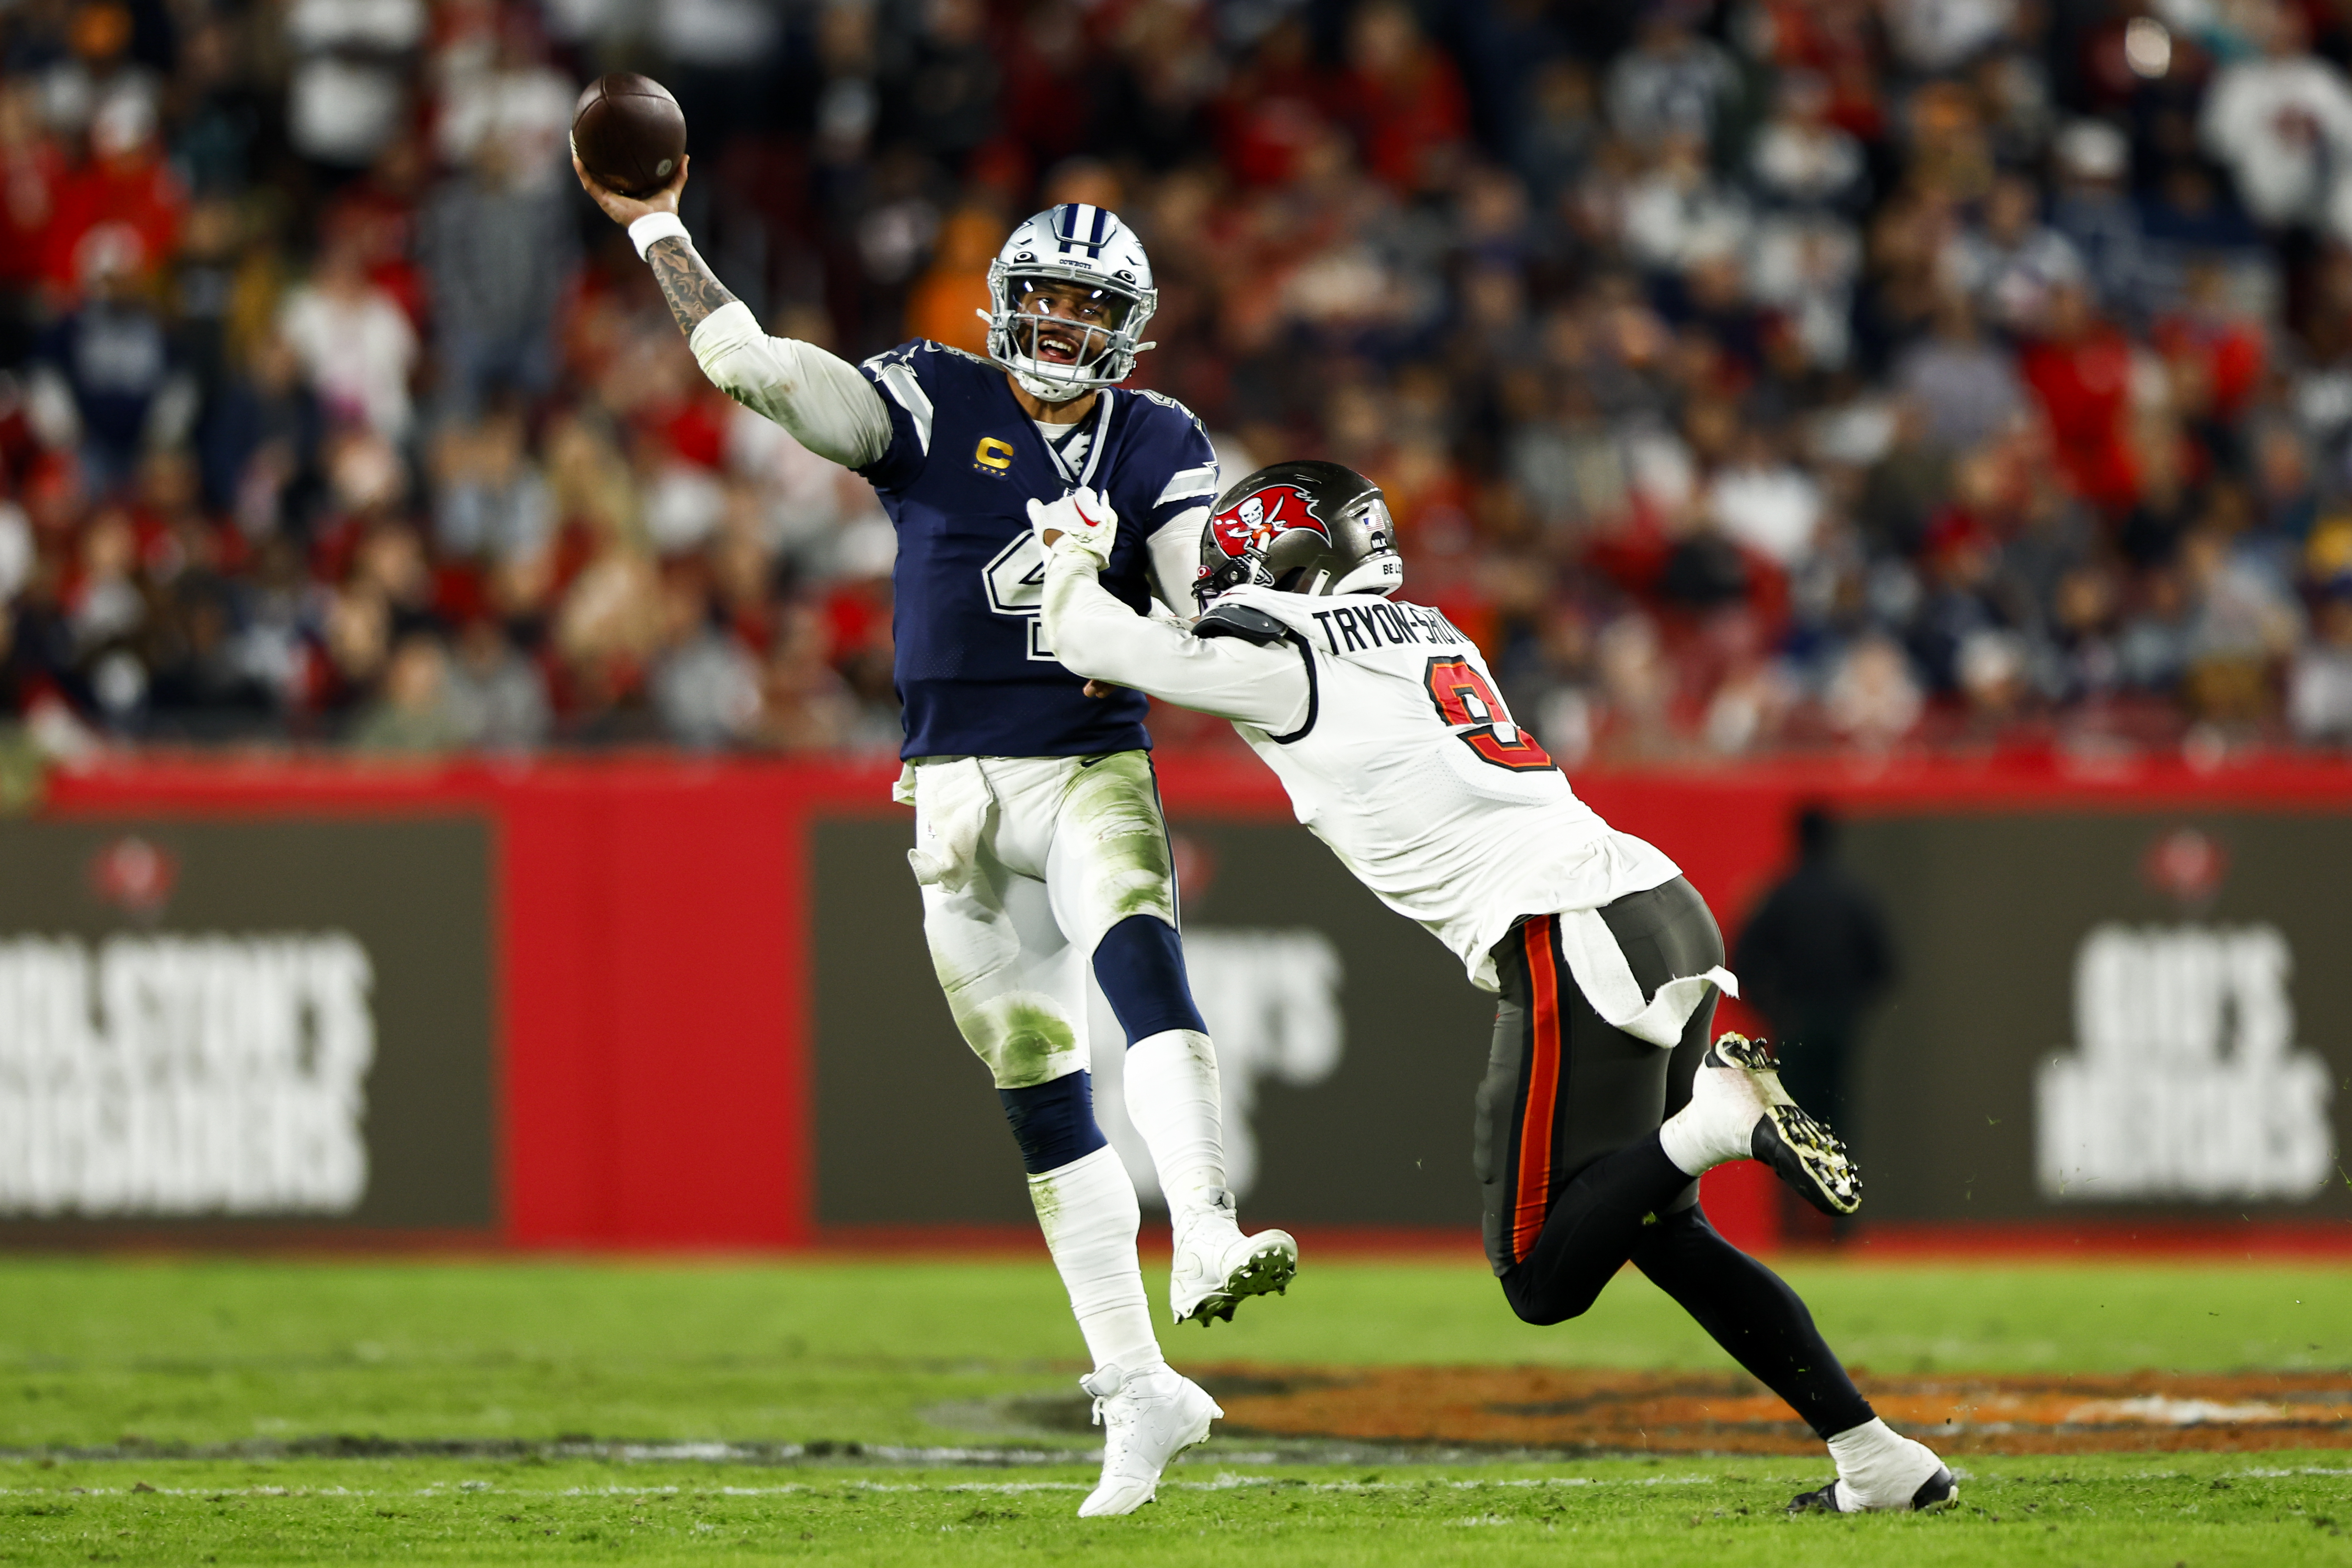 Quarterback Dak Prescott (L) of the Dallas Cowboys passes in the NFL National Football Conference Wild Card Game against the Tampa Bay Buccaneers at Raymond James Stadium in Tampa, Florida, January 16, 2023. /CFP